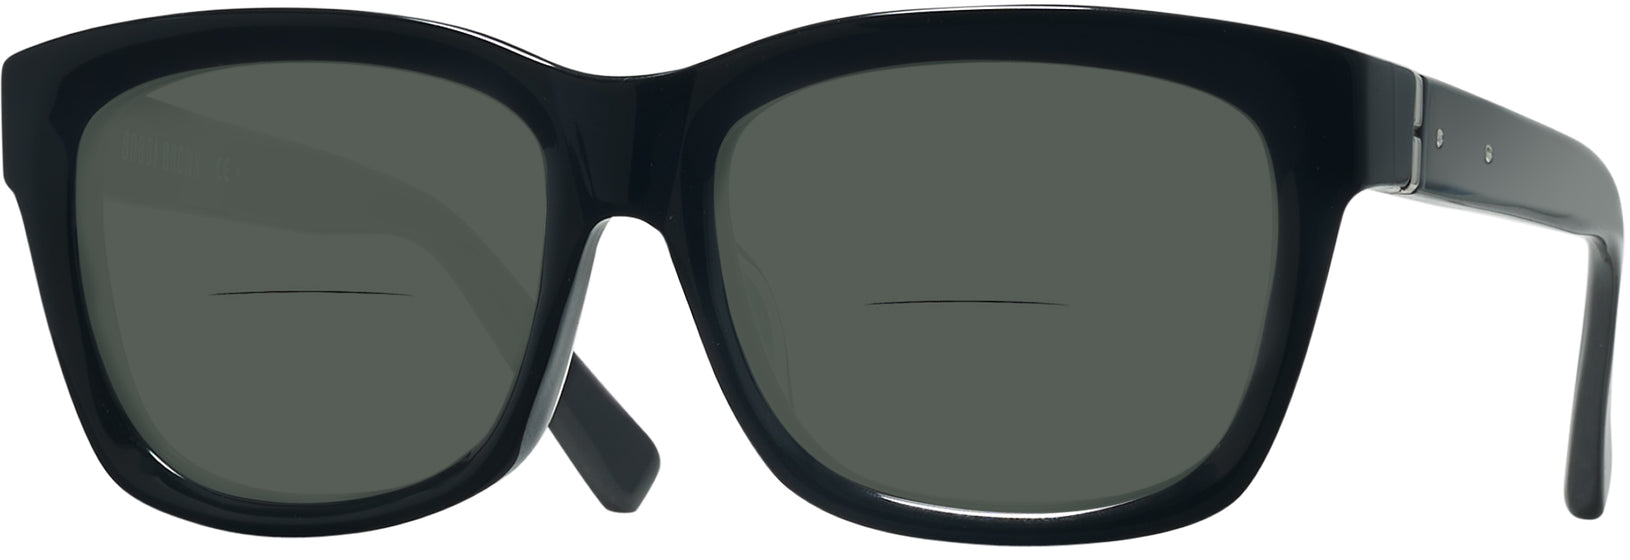 The sunglasses that suit every face shape: Saint Laurent glasses from  Eyewear Index are the perfect everyday choice